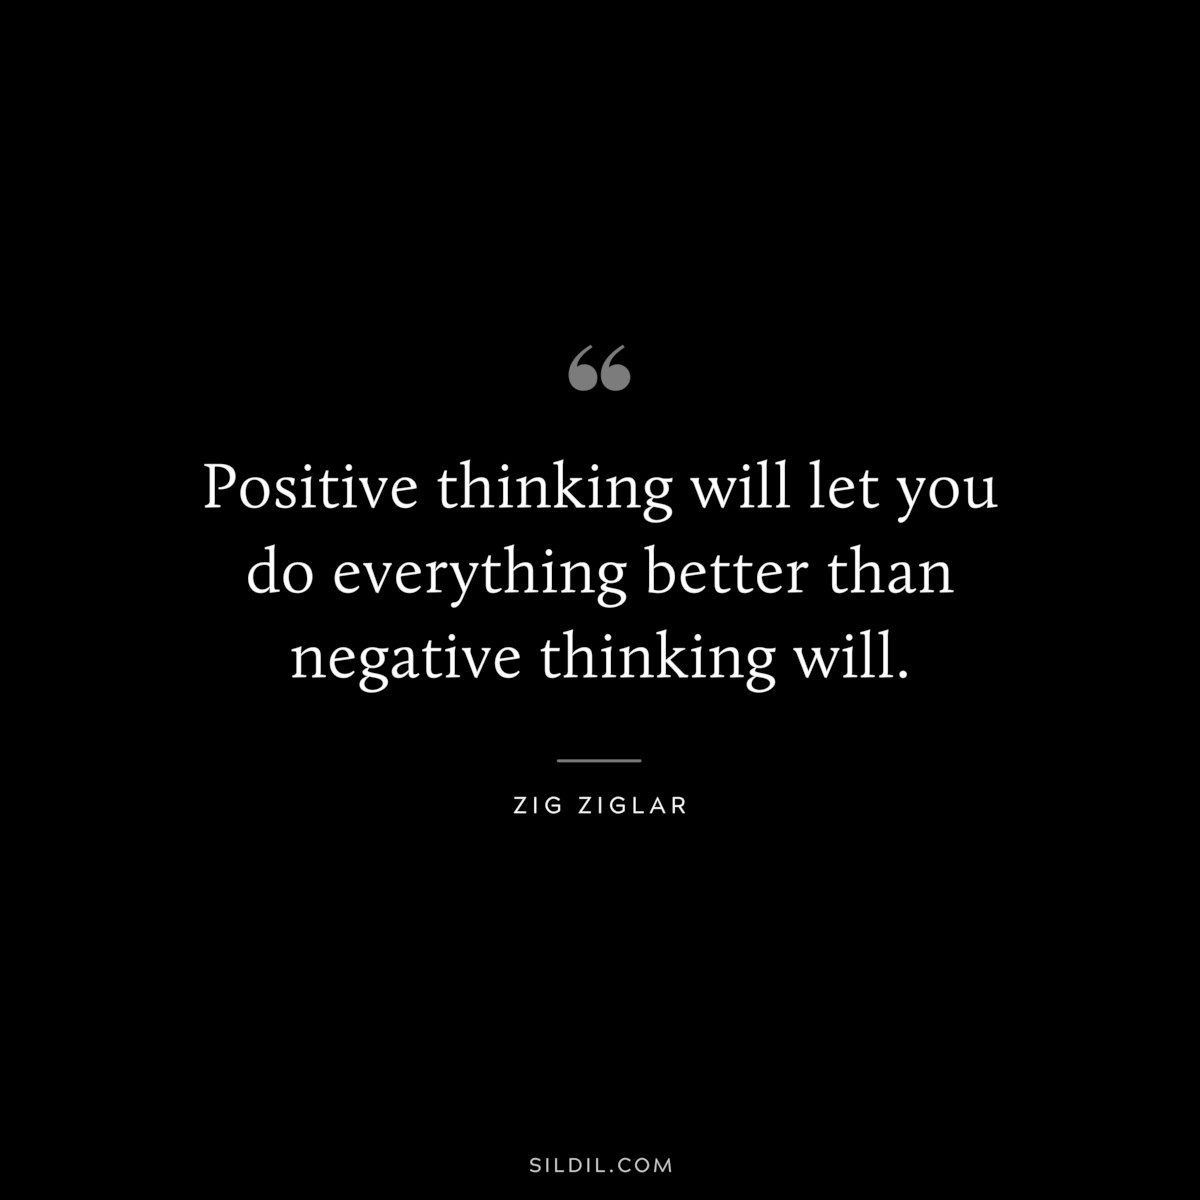 Positive thinking will let you do everything better than negative thinking will. ― Zig Ziglar